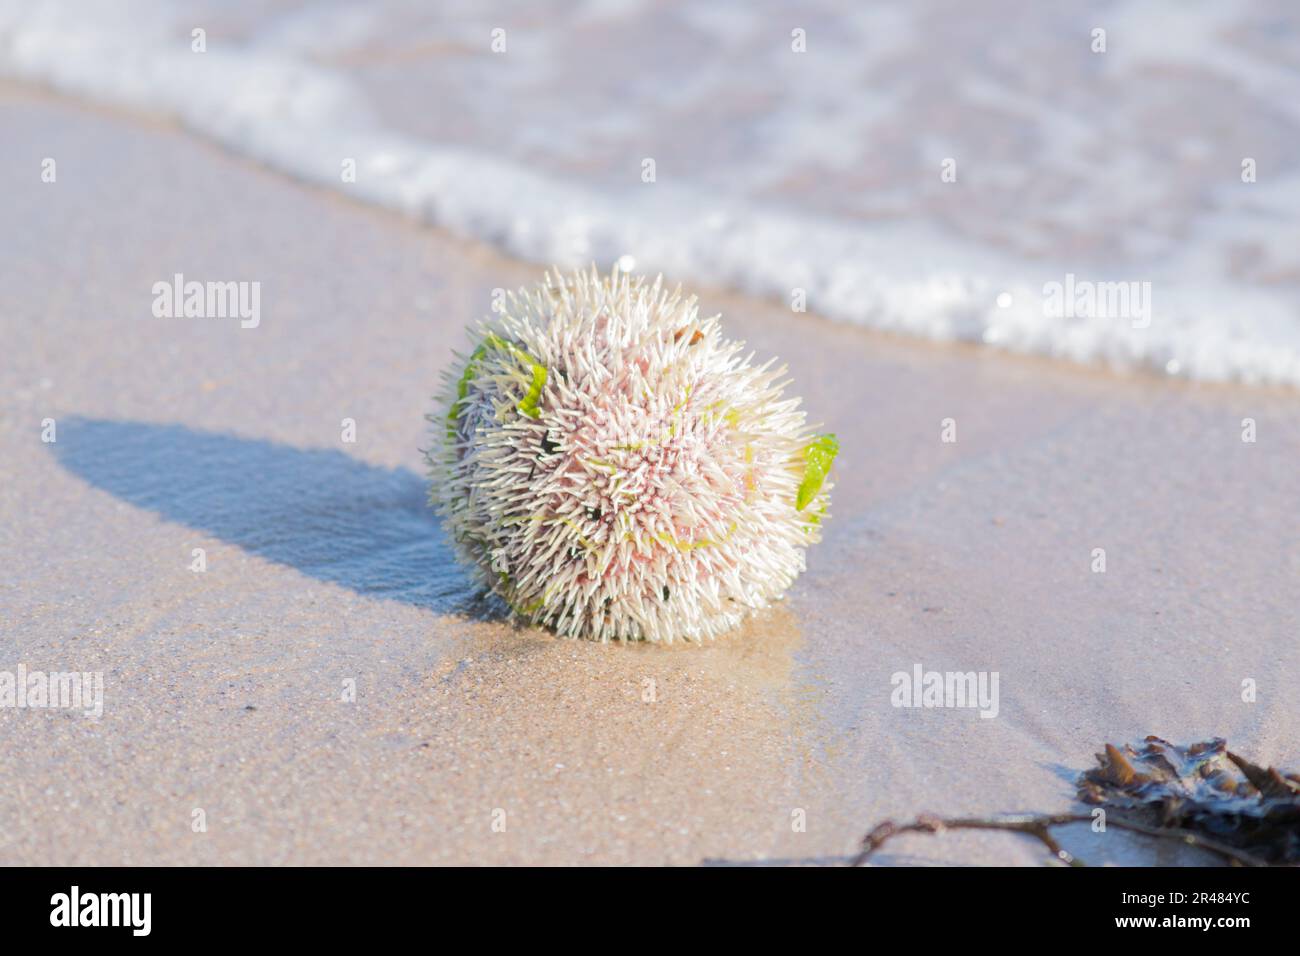 Sea Urchin washed up on the shore Stock Photo